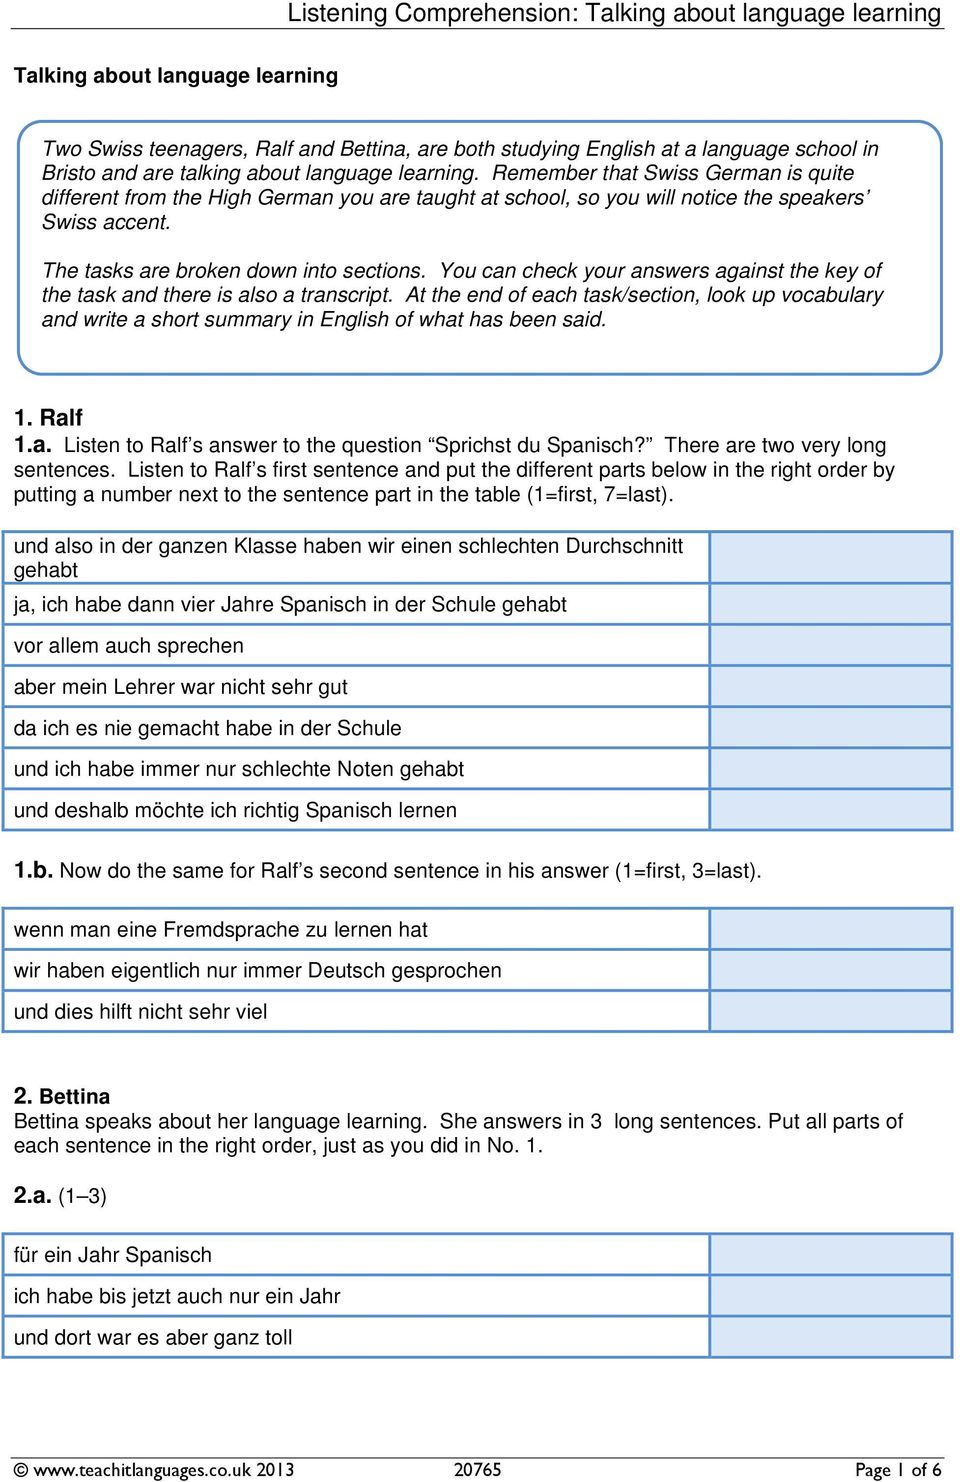 You can check your answers against the key of the task and there is also a transcript. At the end of each task/section, look up vocabulary and write a short summary in English of what has been said.